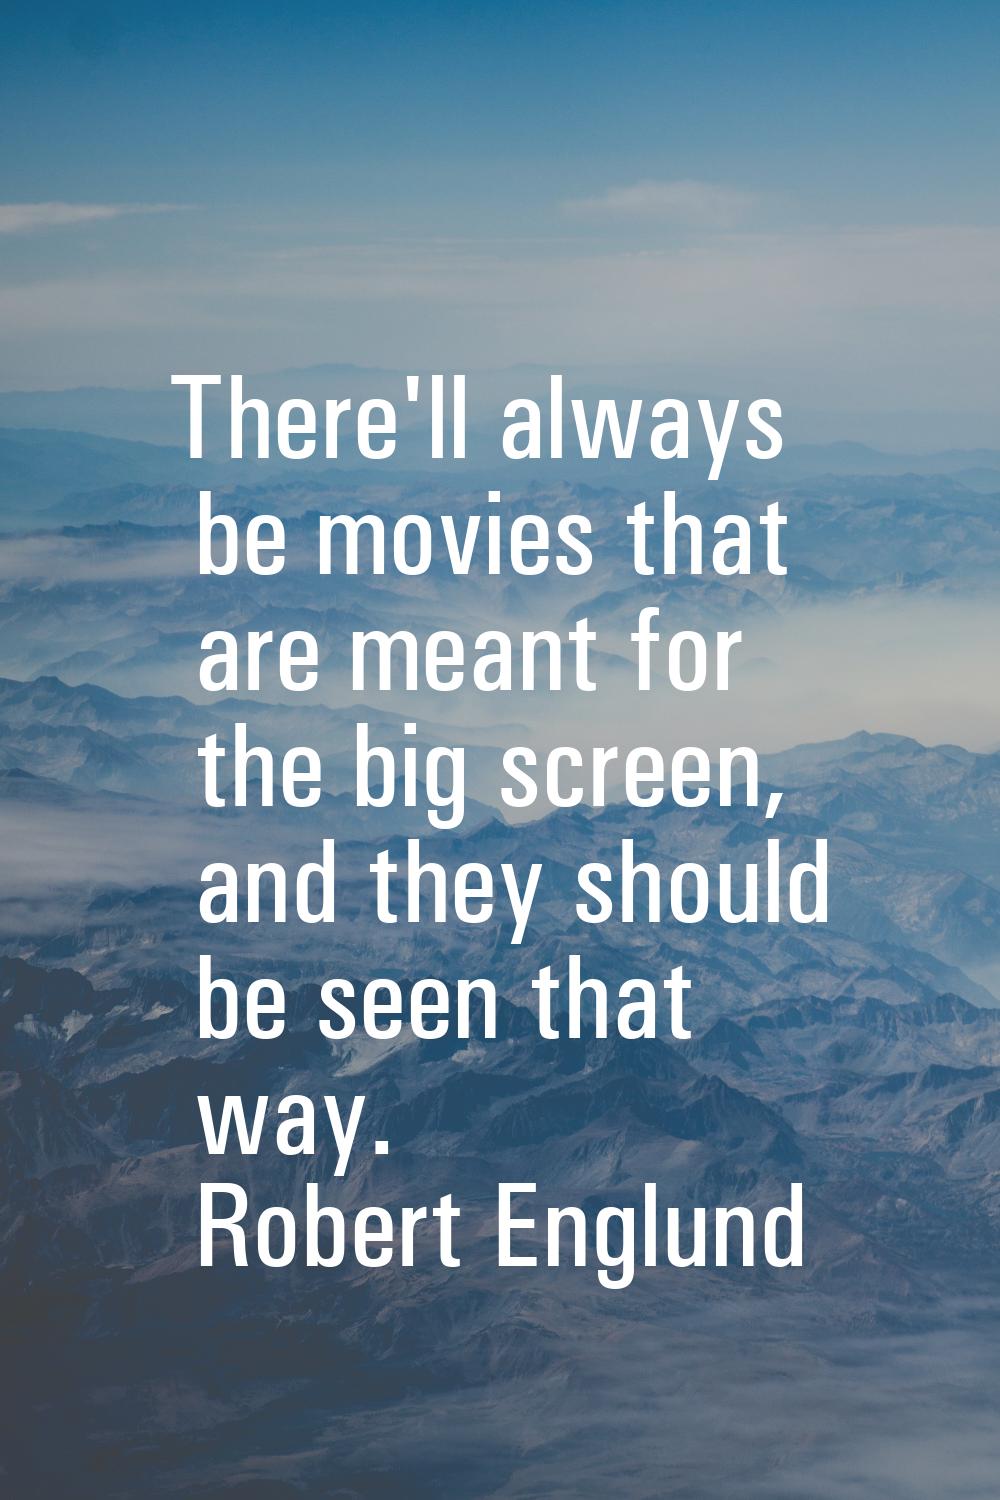 There'll always be movies that are meant for the big screen, and they should be seen that way.